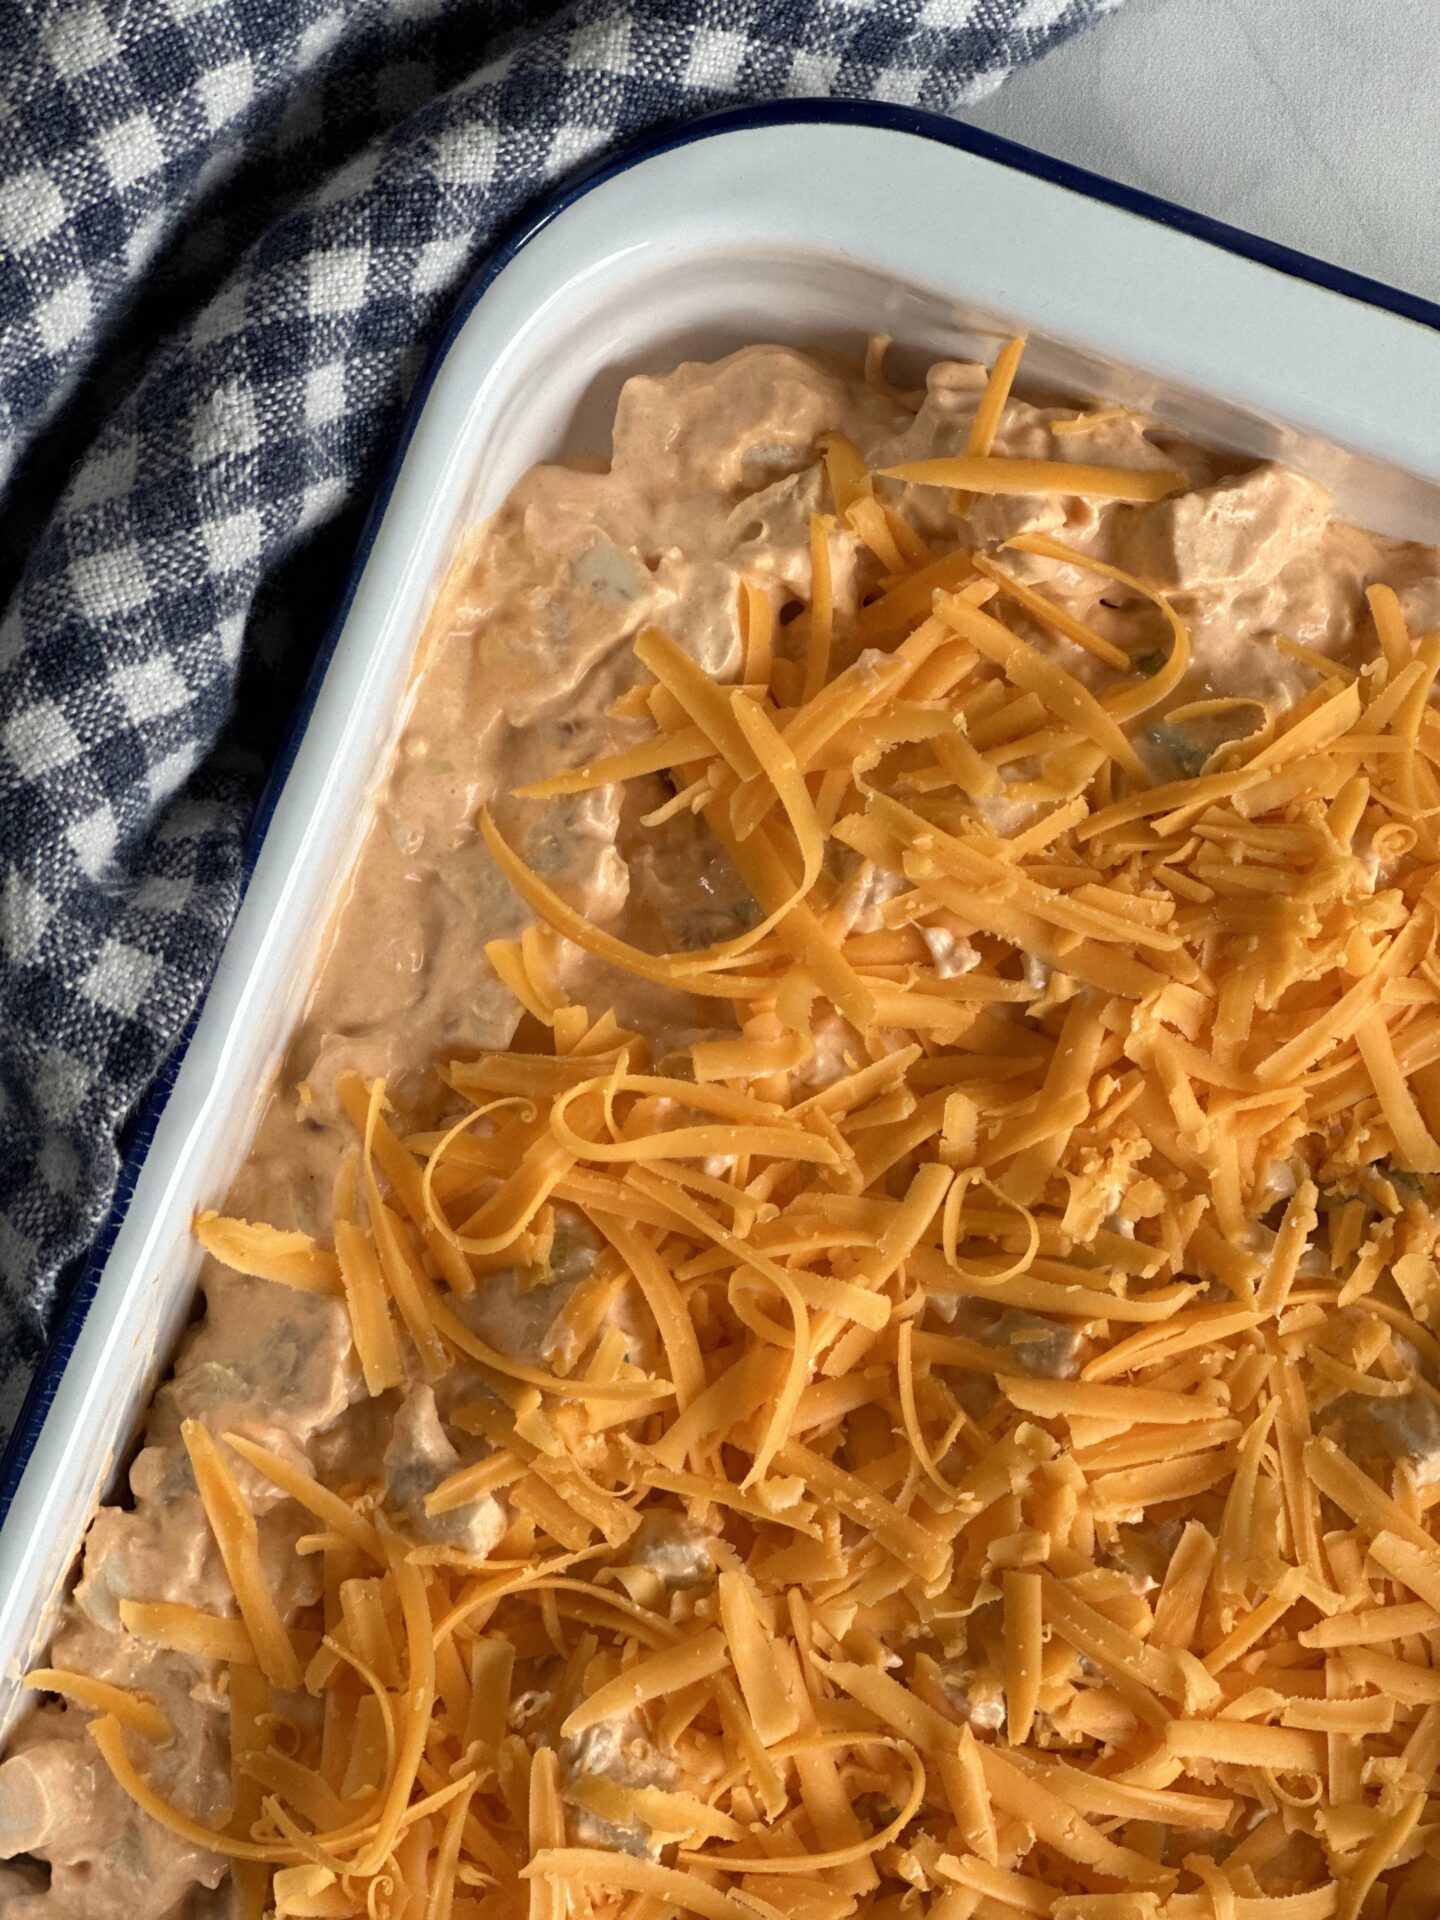 White enamel pan with Hot and Spicy Buffalo Chicken Dip, topped with grated cheddar cheese, ready to be warmed in the oven.